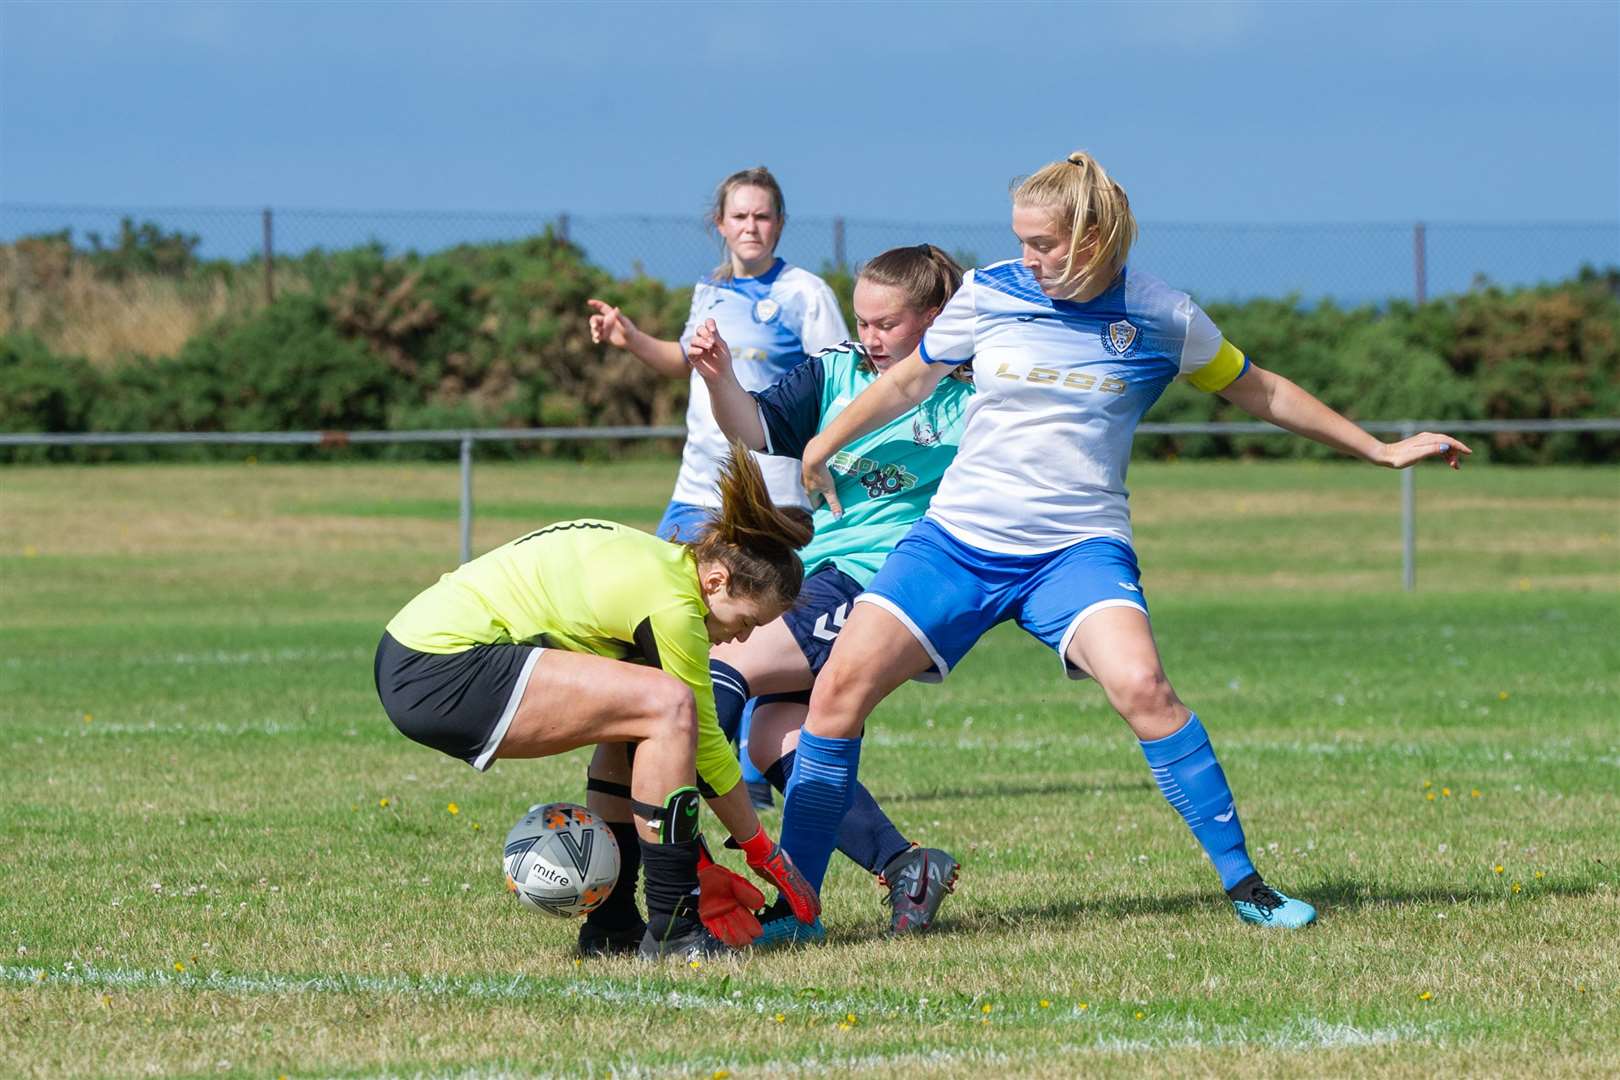 Buckie's Milly Findlay scores after a mix up between Sutherland Women's captain Bethany Sutherland and goalkeeperJennifer Moodie...Buckie Ladies FC (1) vs Sutherland Women FC (7) - Highland and Island League Cup - Merson Park, Buckie 09/08/2021...Picture: Daniel Forsyth..